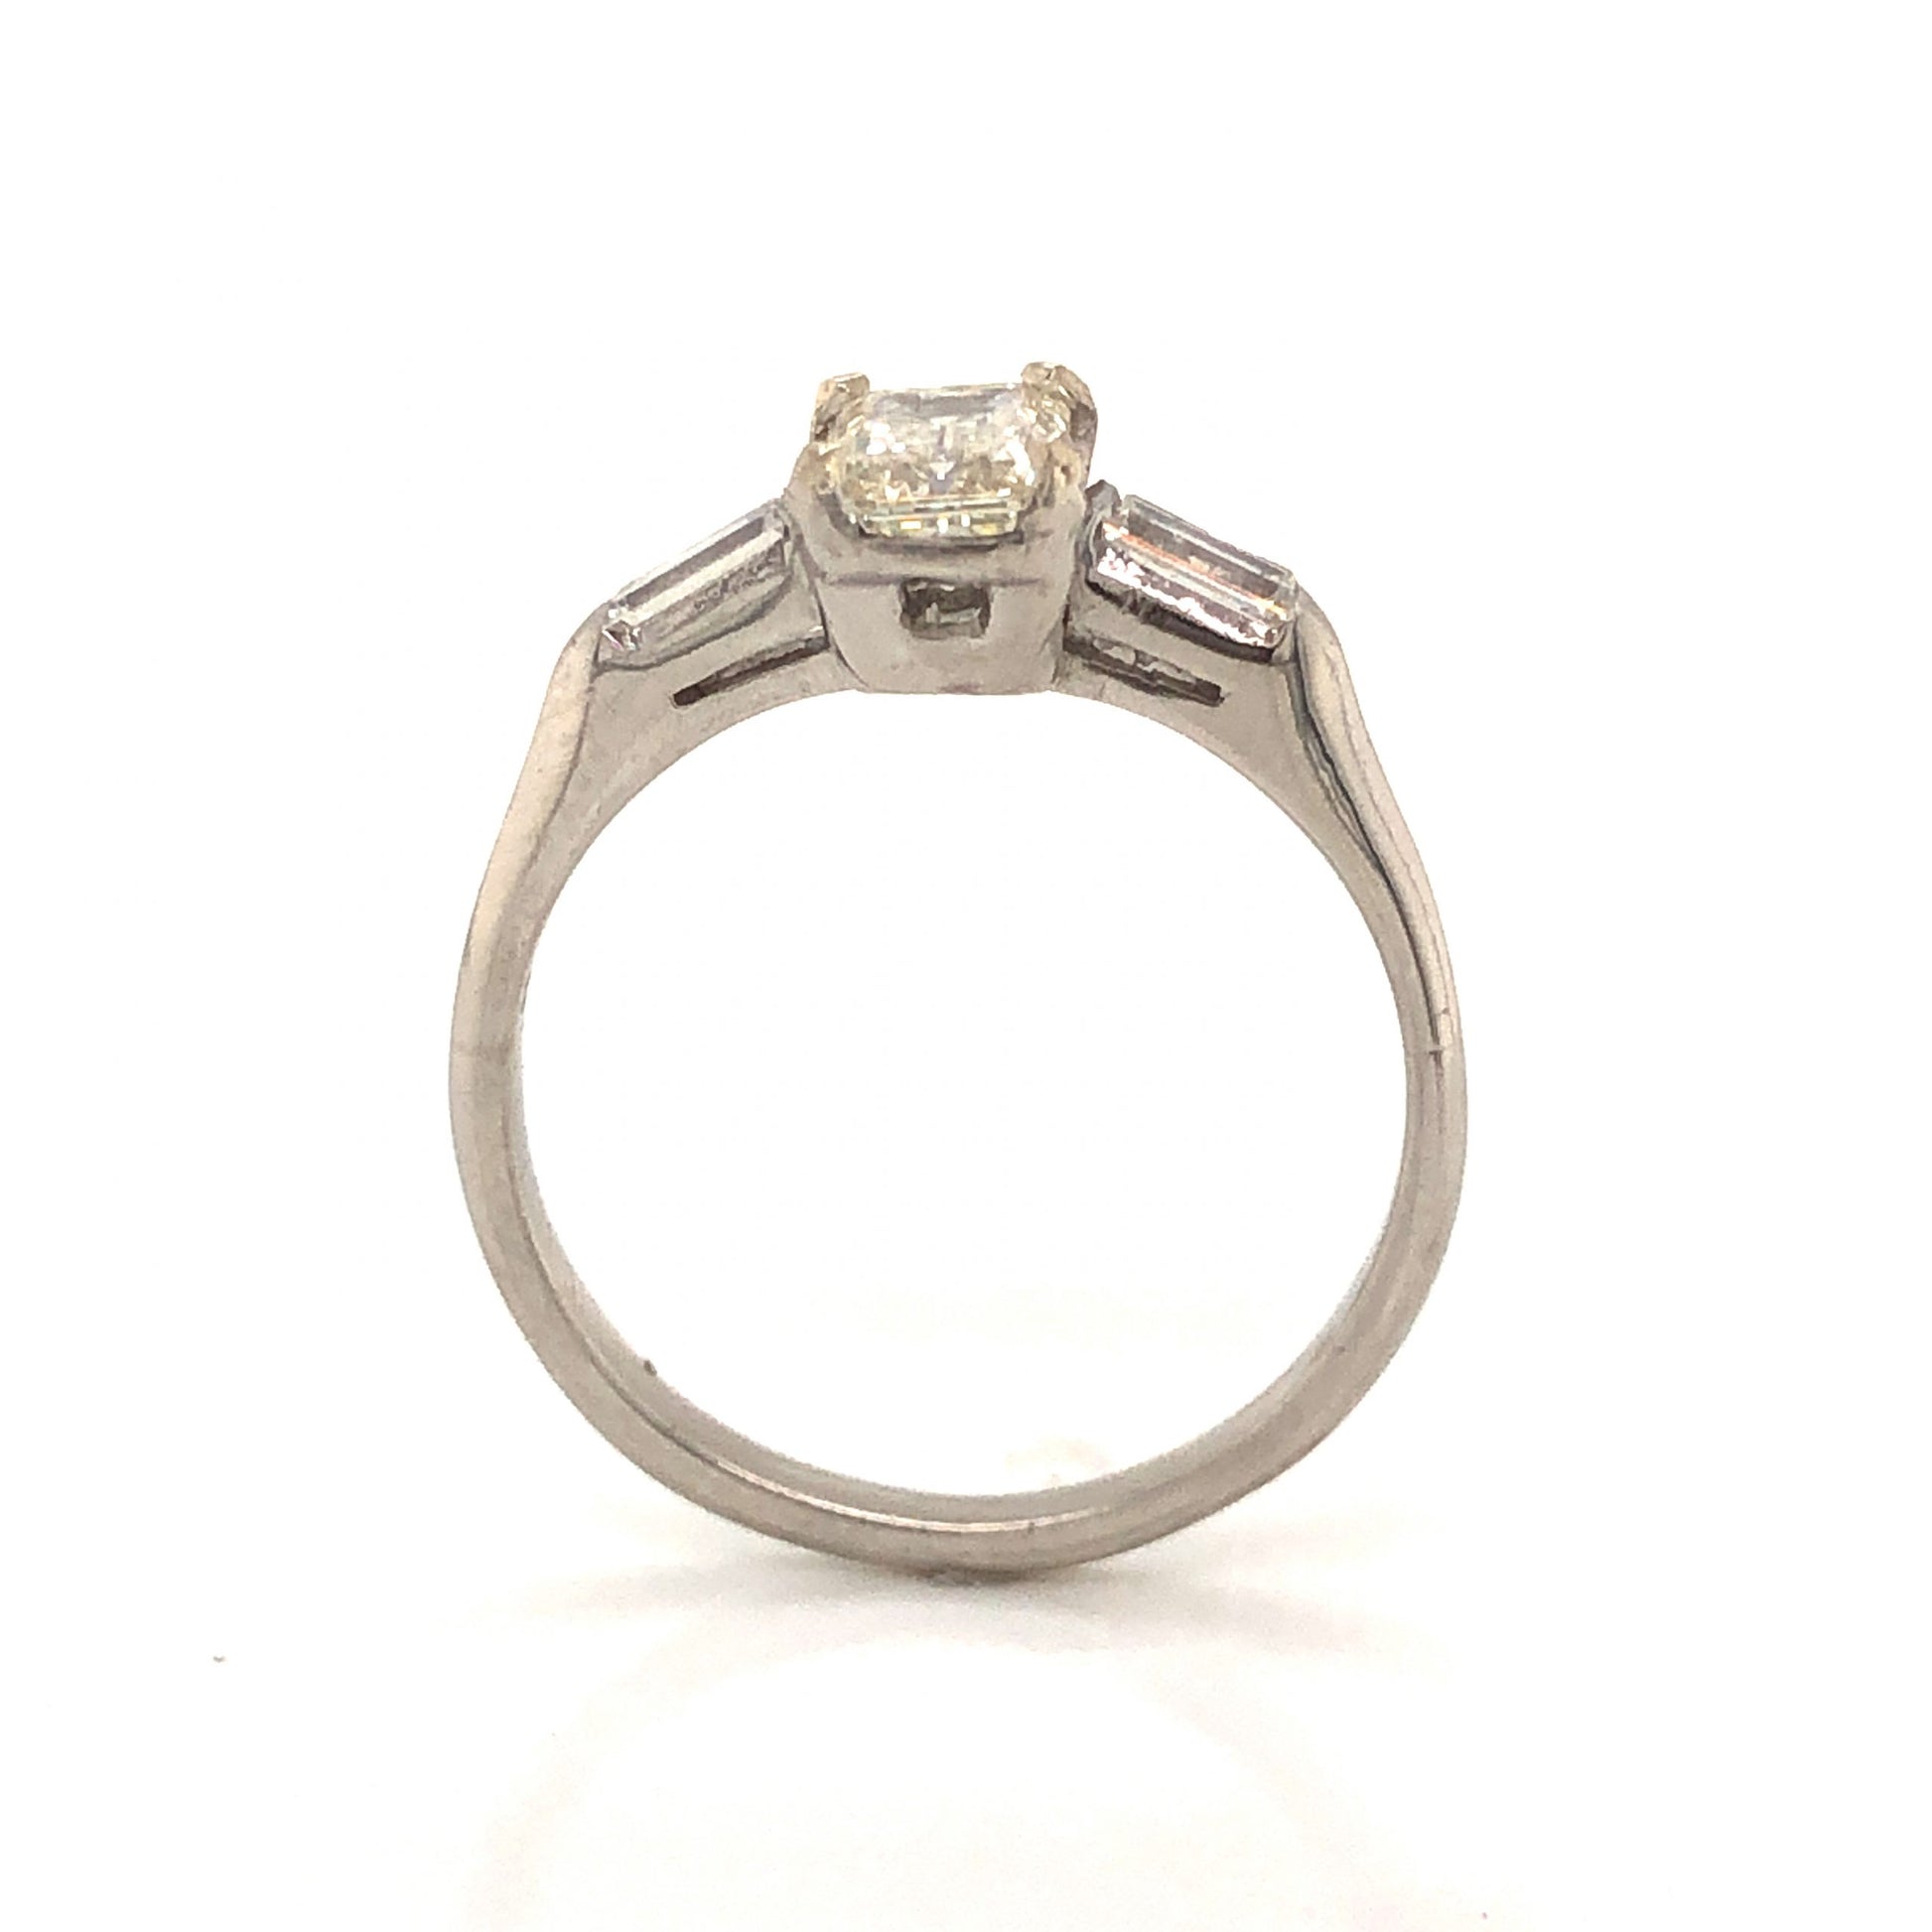 Vintage .63 Emerald Cut Diamond Engagement Ring in PlatinumComposition: PlatinumRing Size: 5.5Total Diamond Weight: .93 ctTotal Gram Weight: 3.5 gInscription: 90